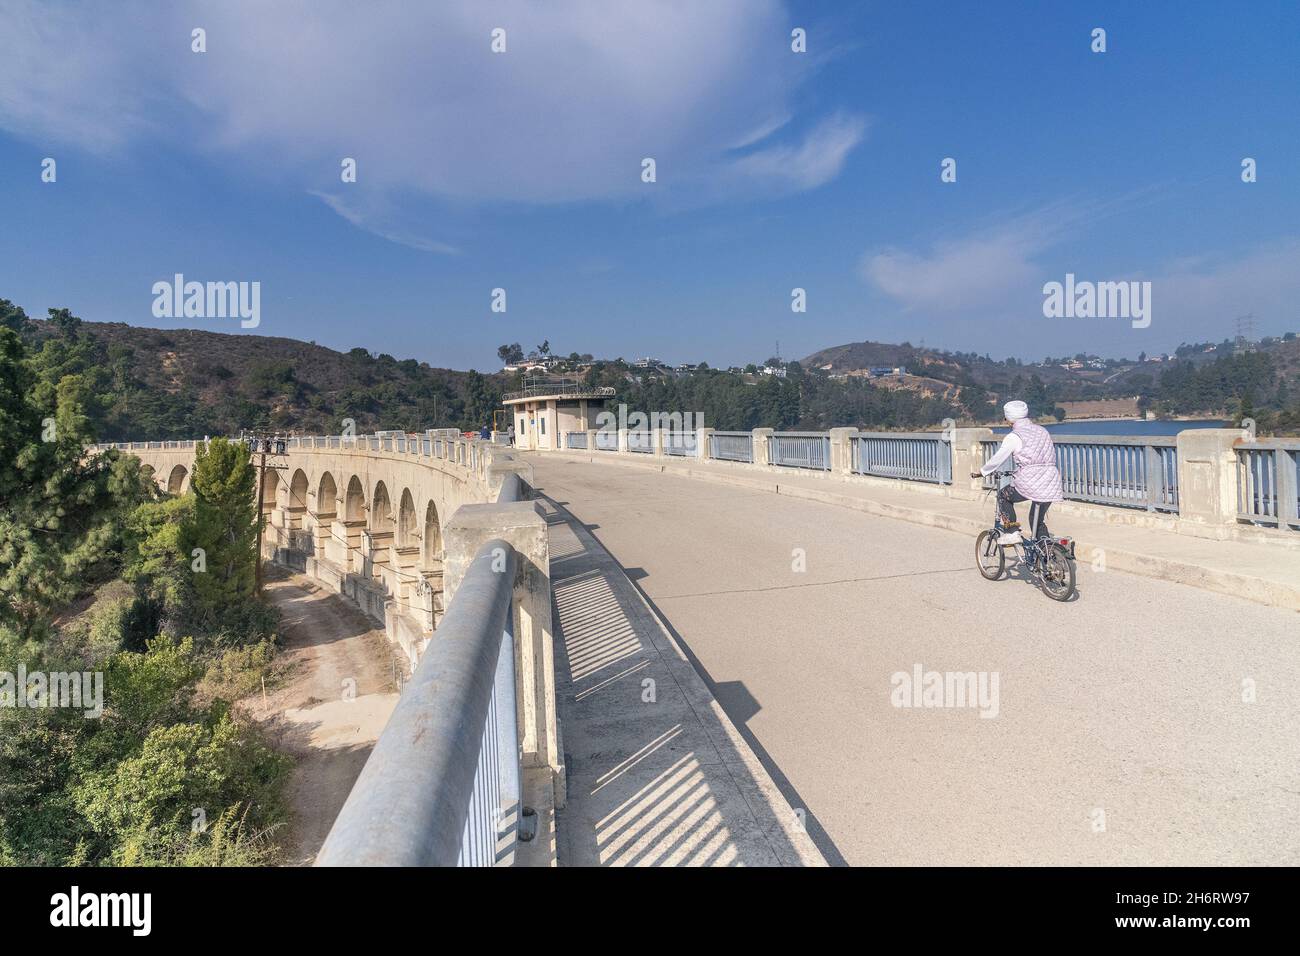 Los Angeles, CA, USA - November17, 2021: A bicyclist rides across Lake Hollywood via the Mulholland dam in Los Angeles, CA. Stock Photo